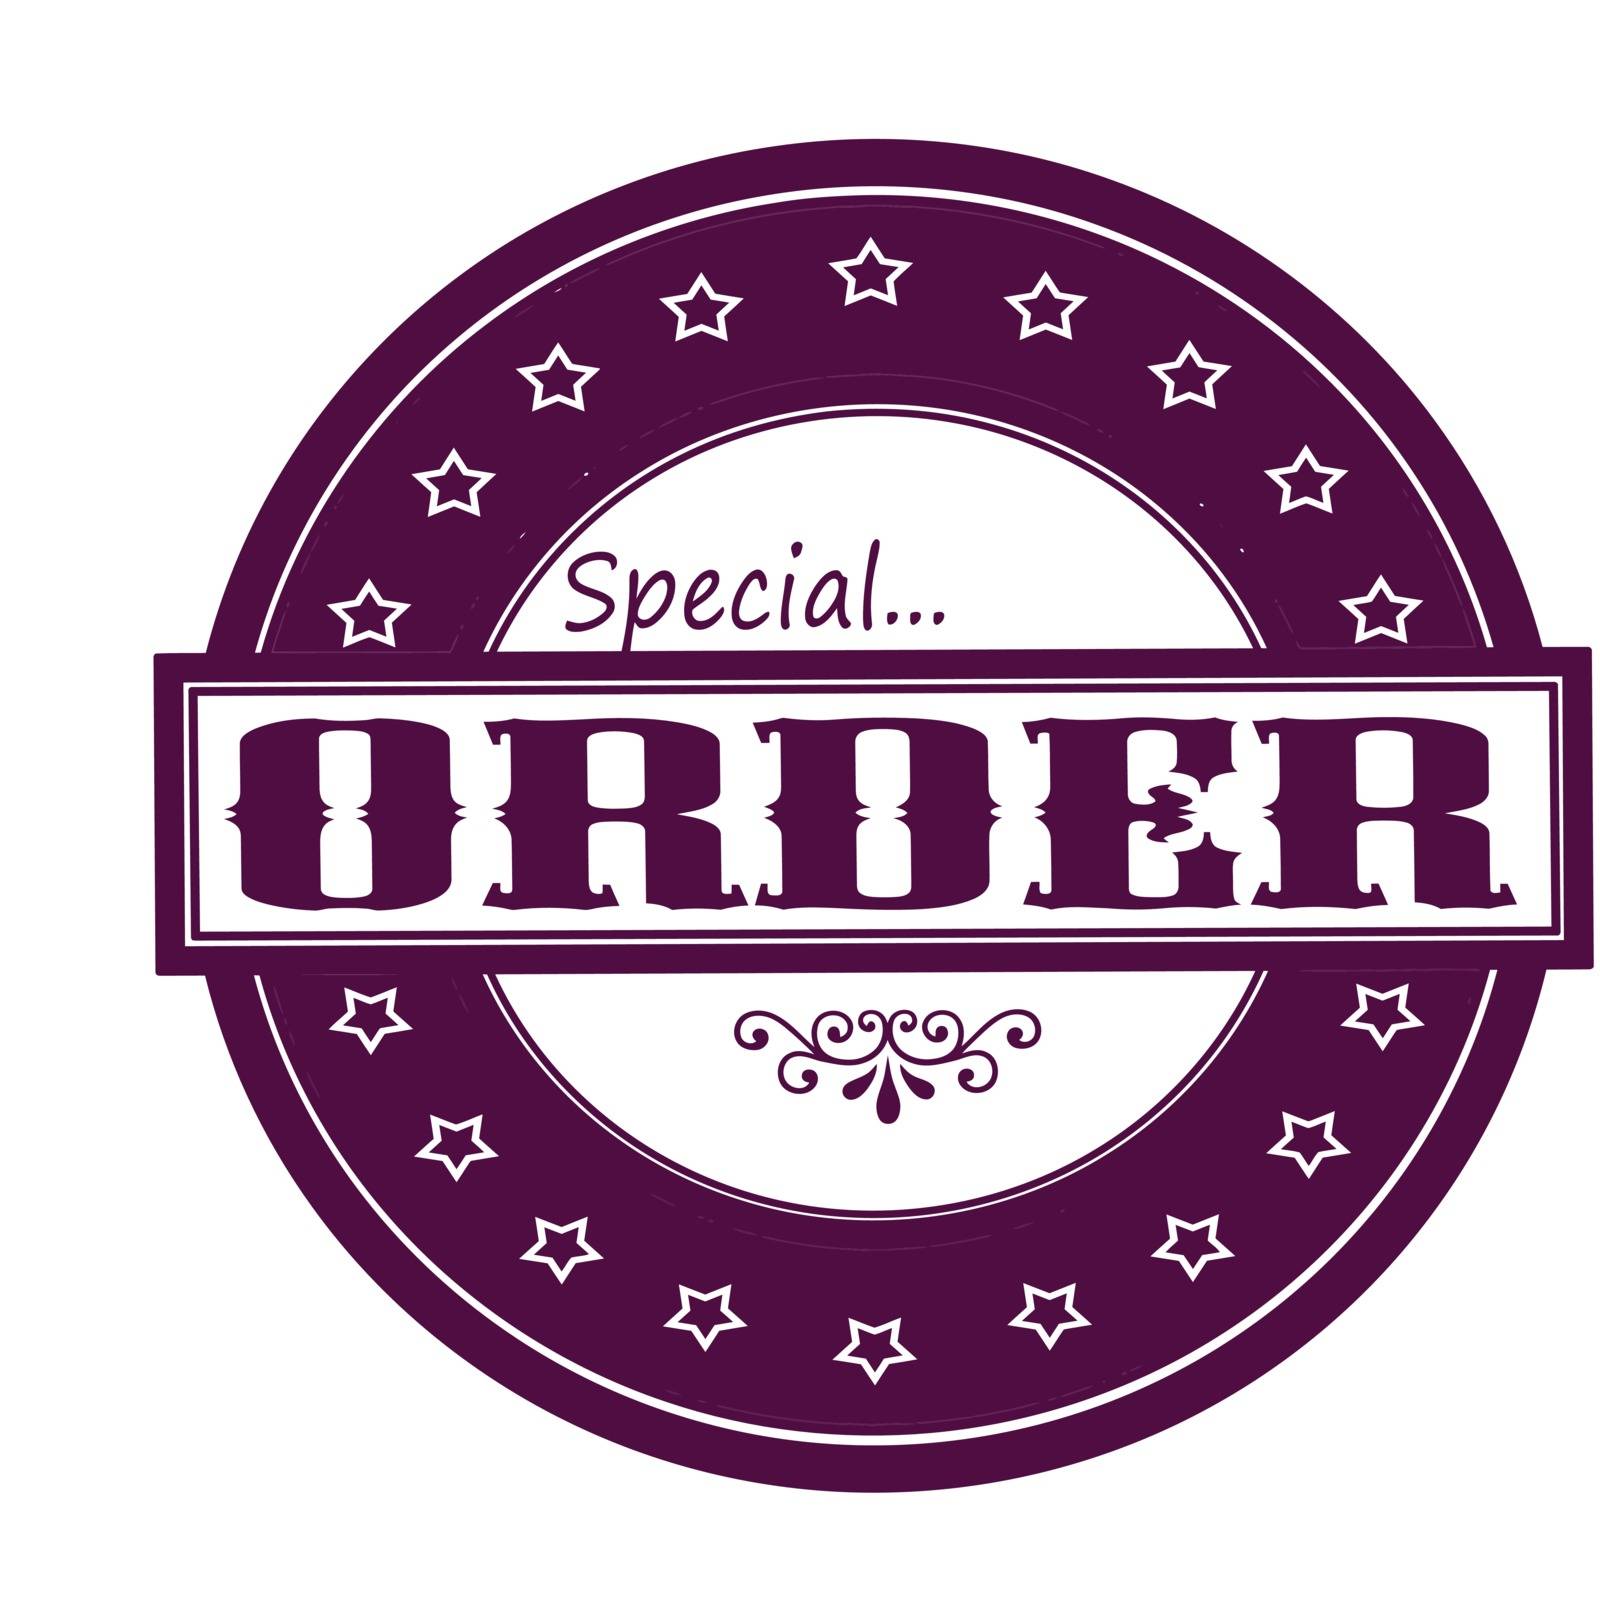 Special order by carmenbobo